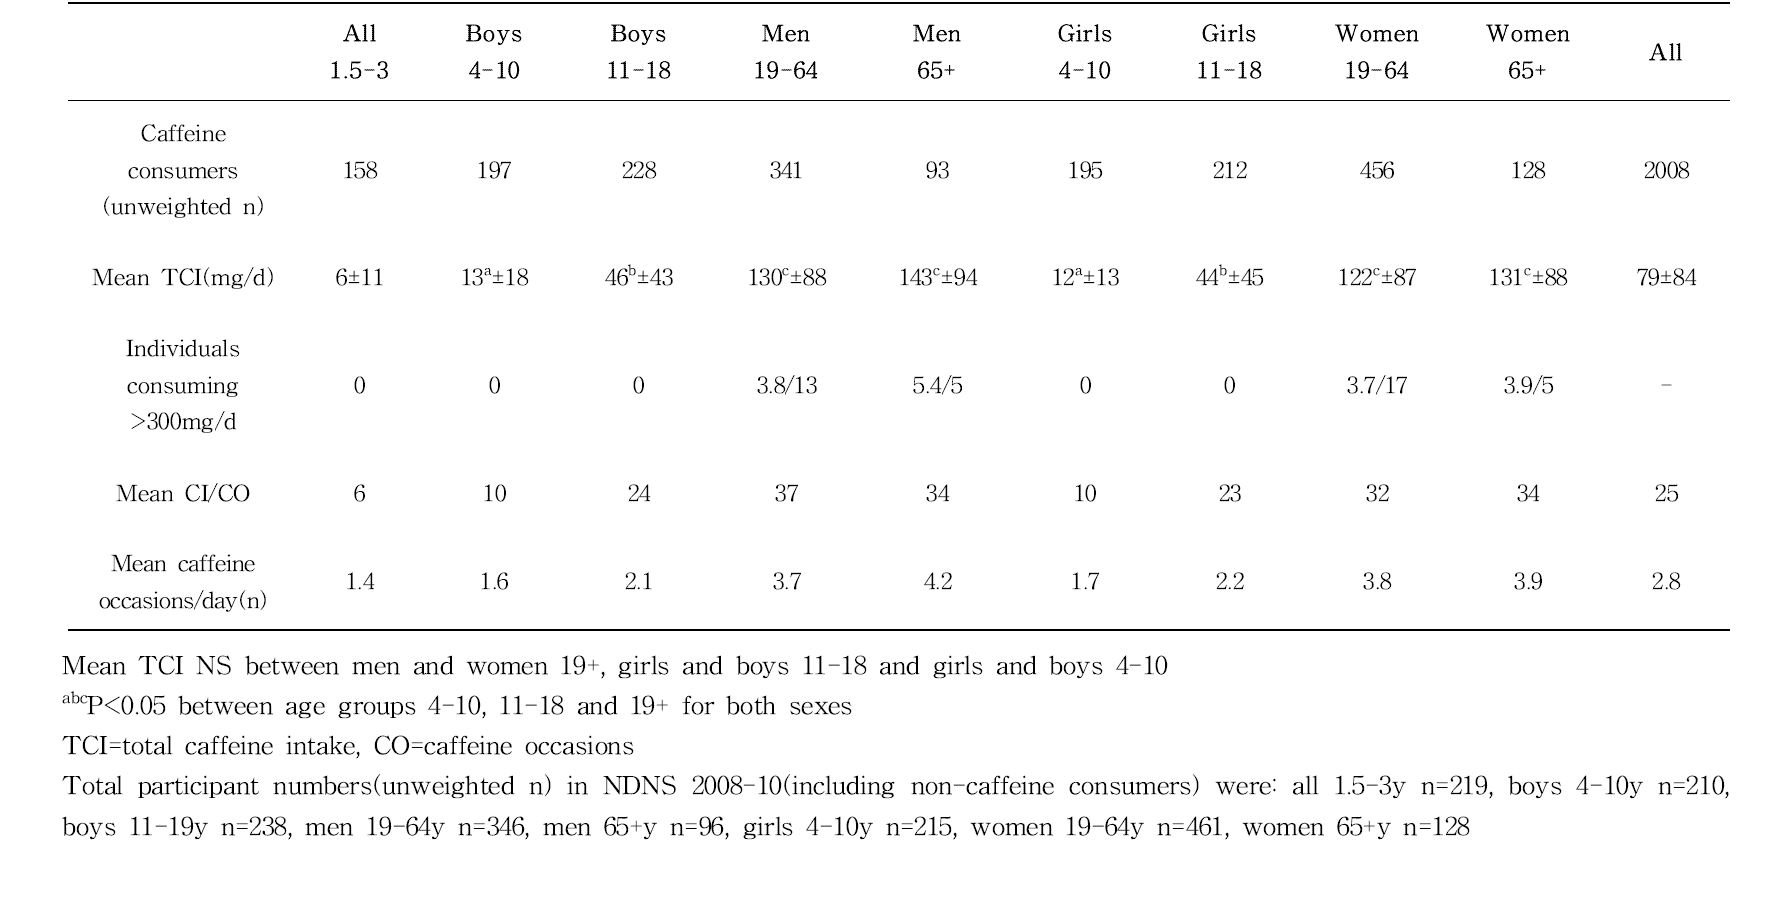 Caffeine intake(CI, mg) of caffeine consumers only, in NDNS 2008-2010, by age(y) and sex group